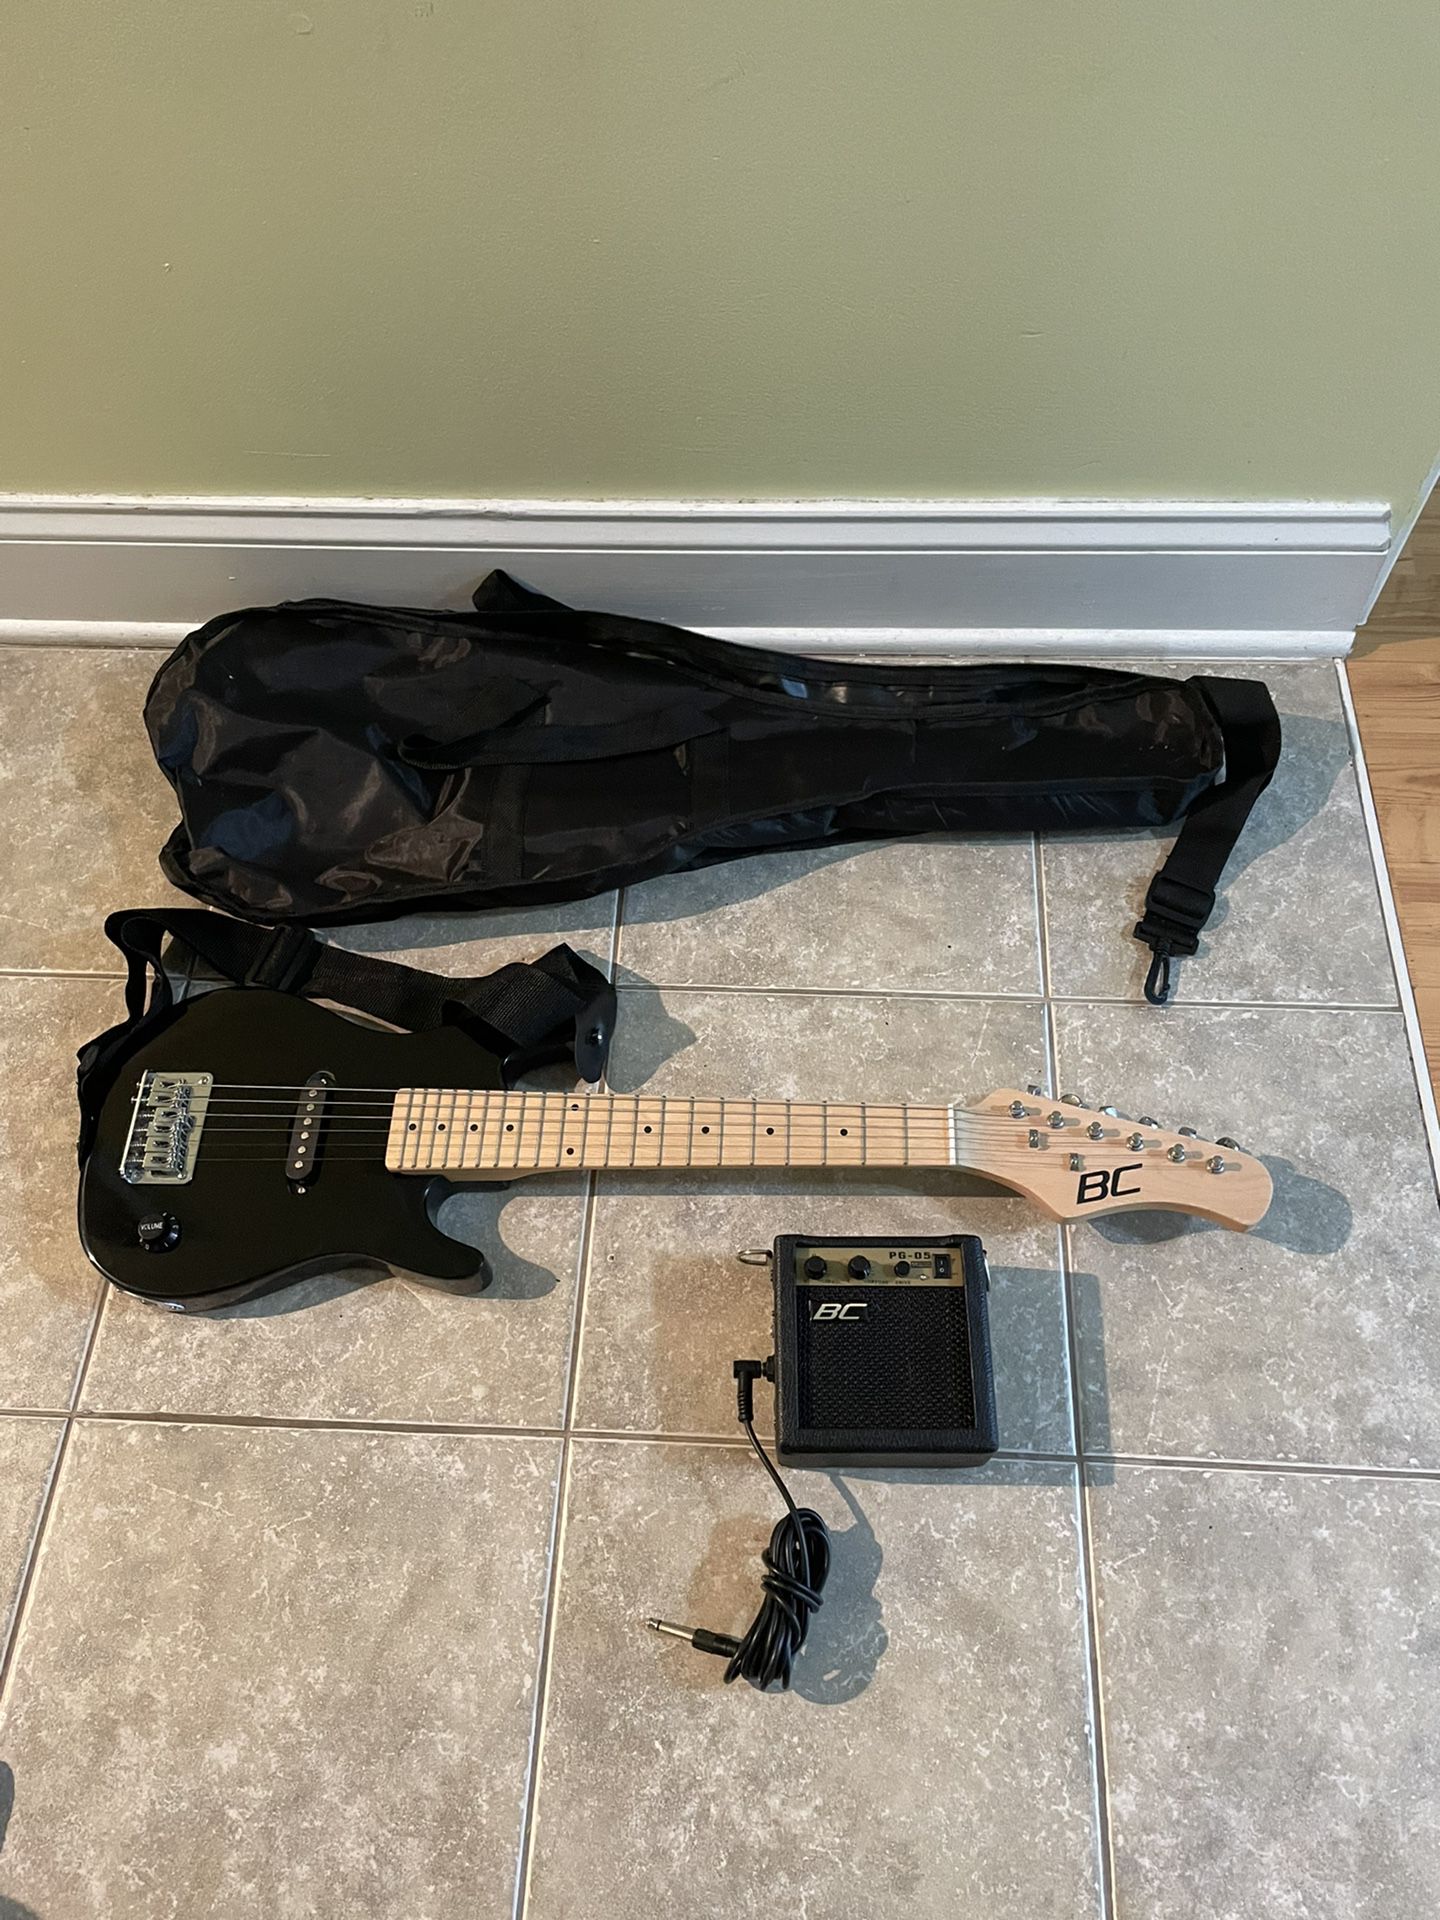 30” Kids Electric Guitar Plus Amp And Case In GOOD Condition!